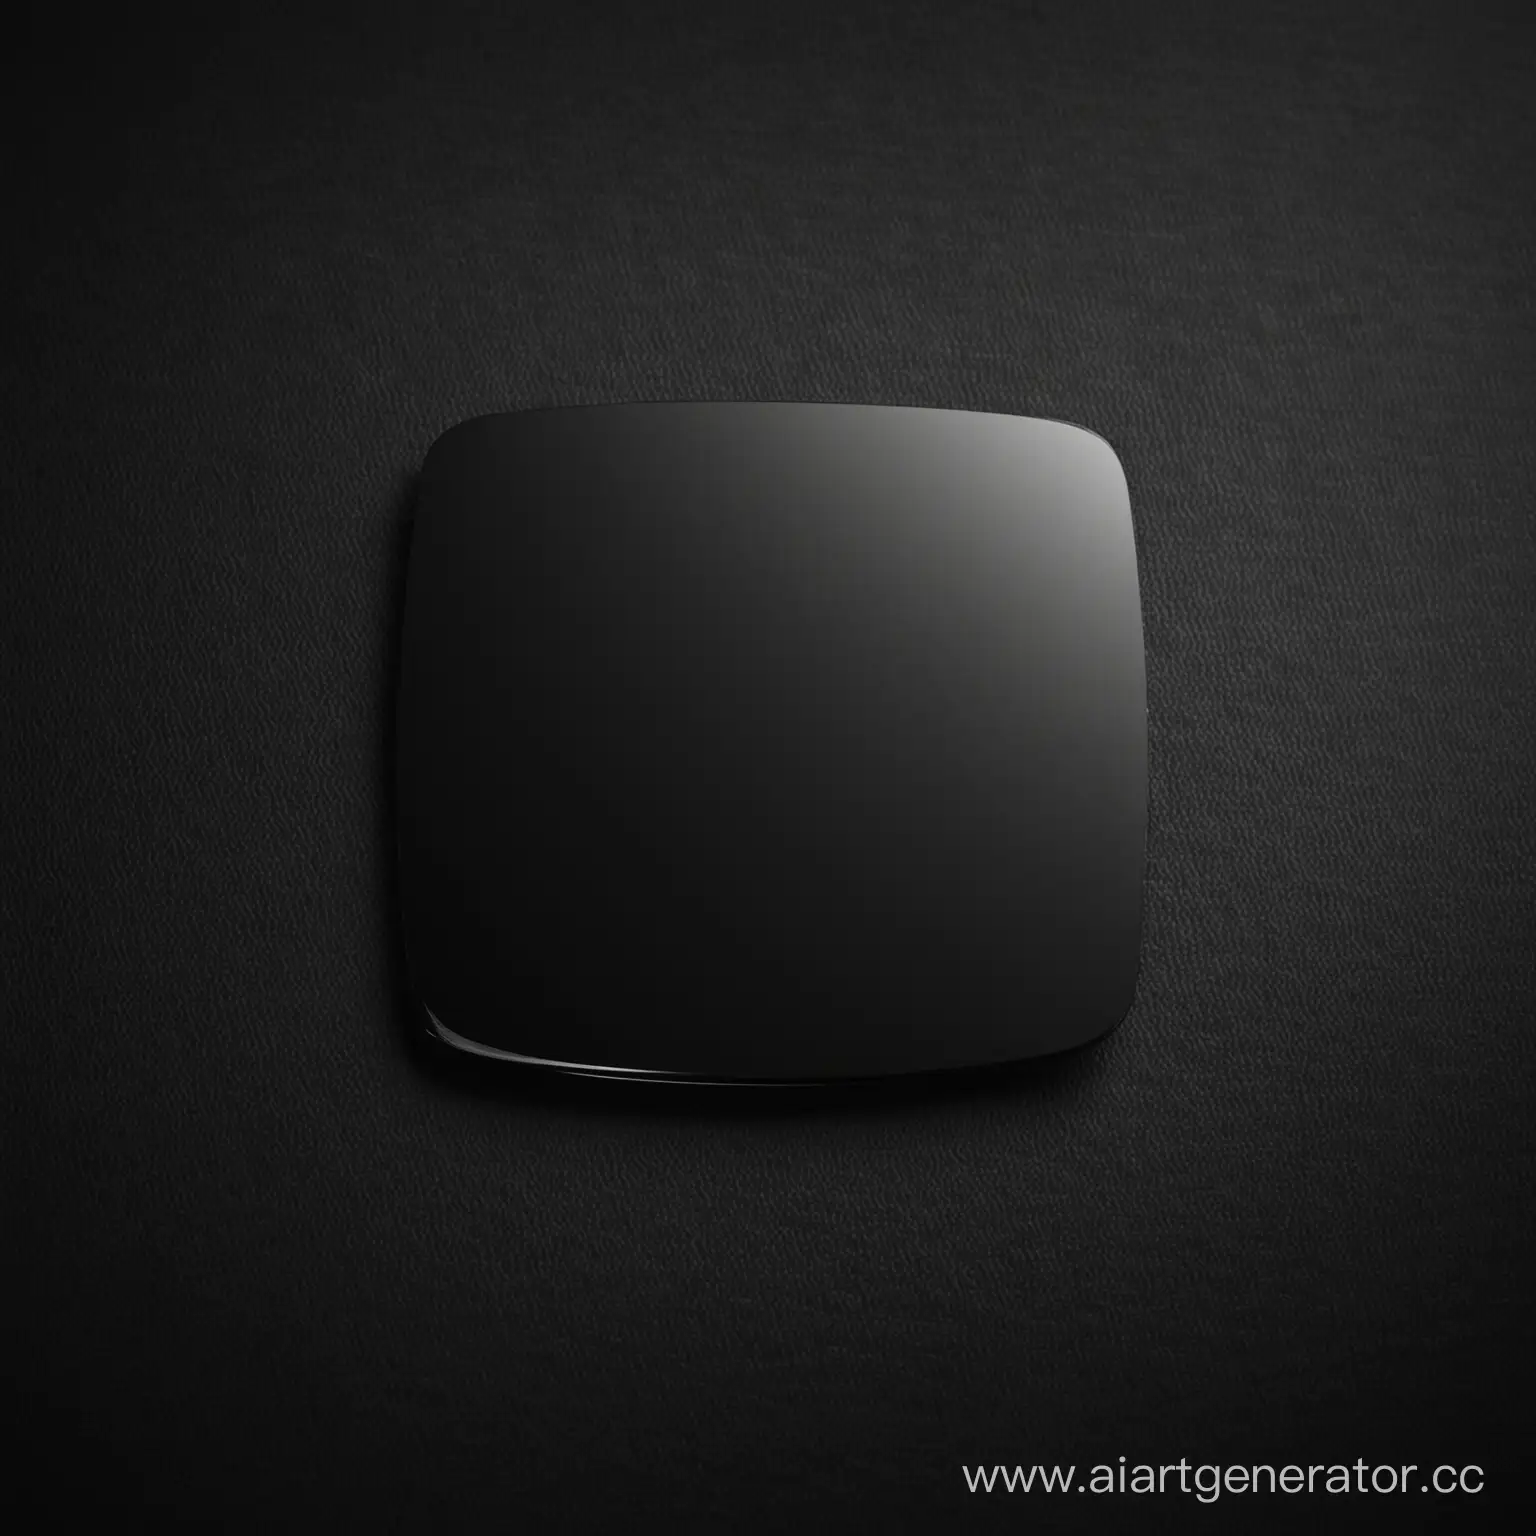 HighQuality-Smart-Technologies-on-Carbon-Black-Computer-Background